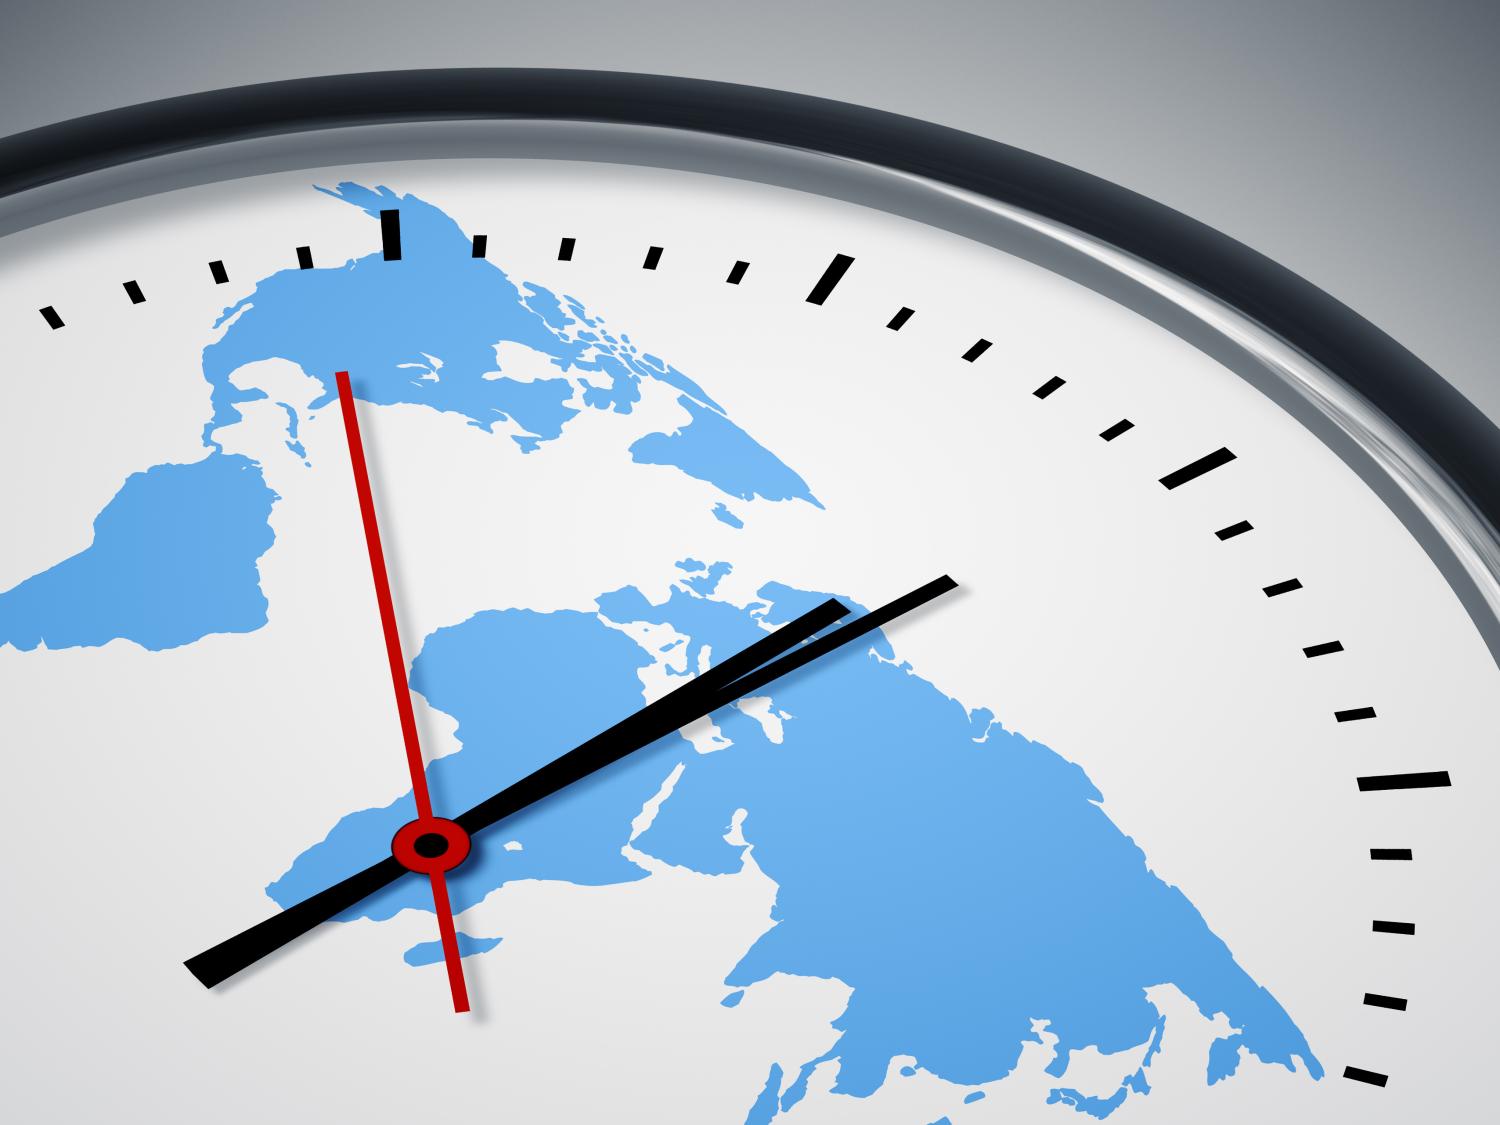 Clock with world map background